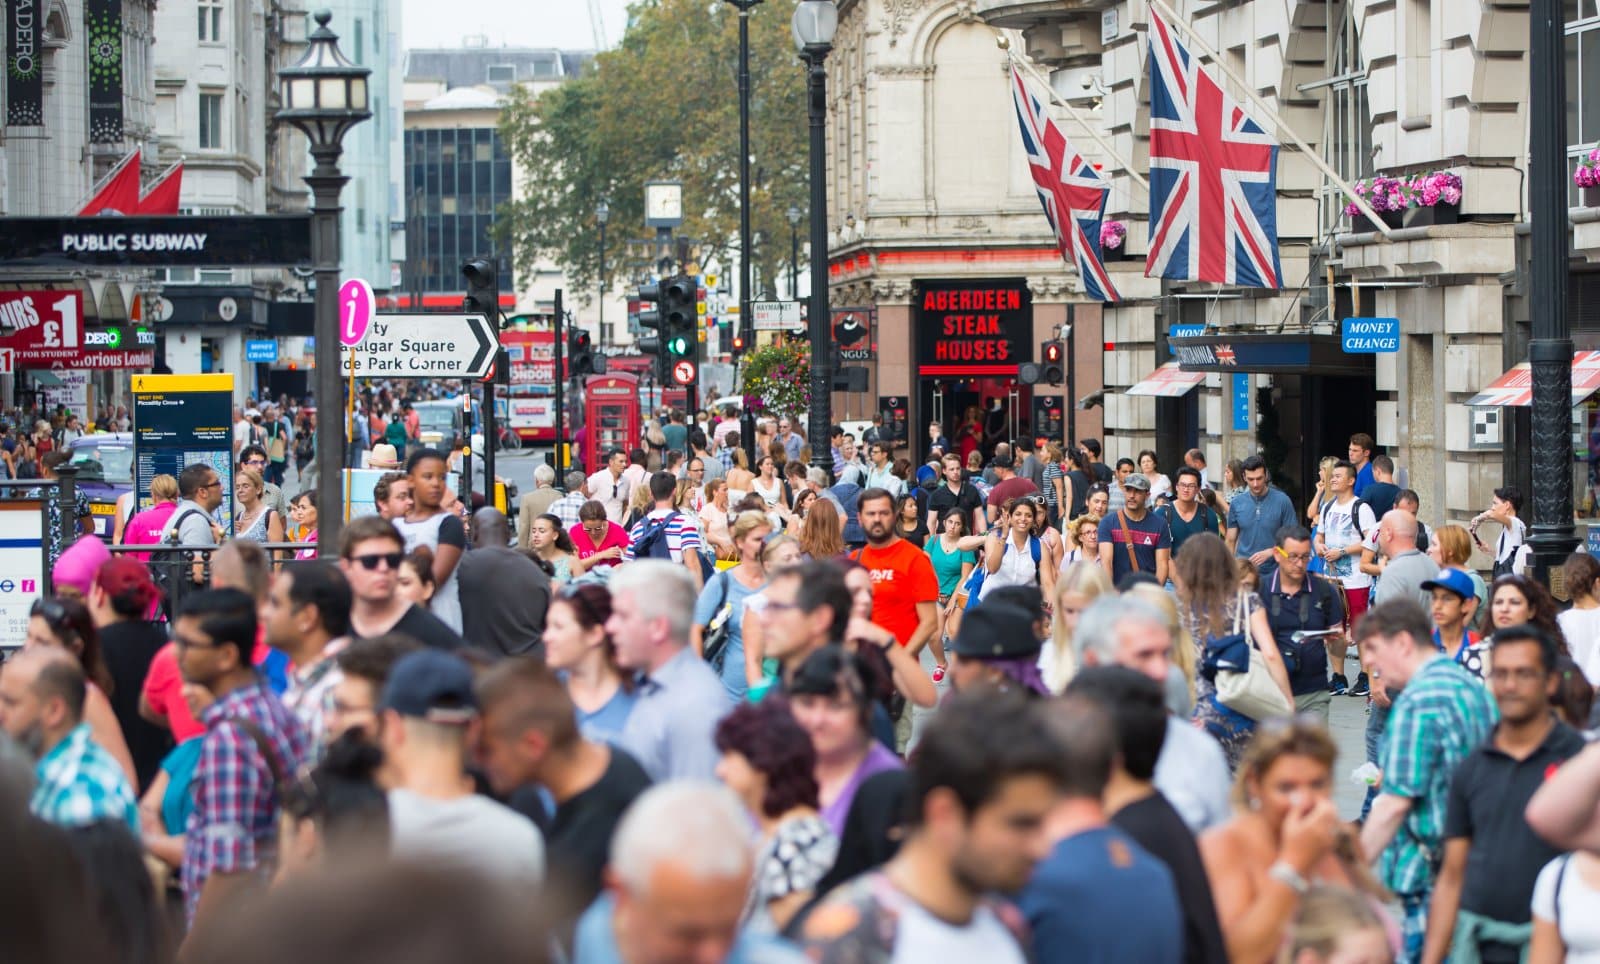 <p class="wp-caption-text">Image Credit: Shutterstock / IR Stone</p>  <p><span>Crowds can be overwhelming and are prime spots for pickpockets. Keep your belongings secure and stay aware of your surroundings.</span></p>